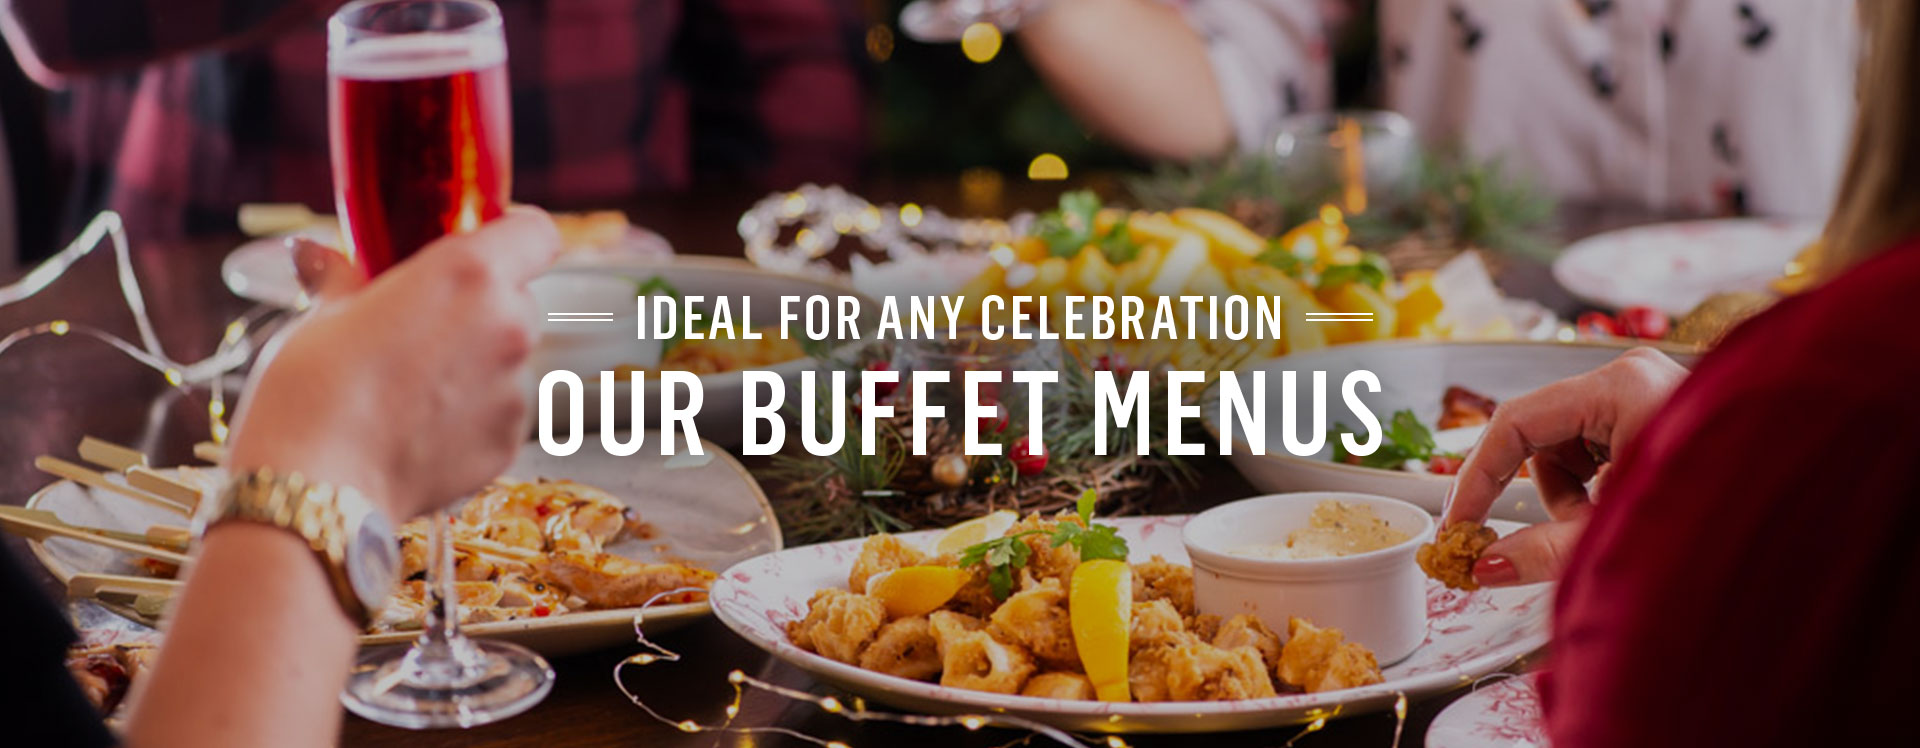 Buffet and Drinks Packages at Nicholson's